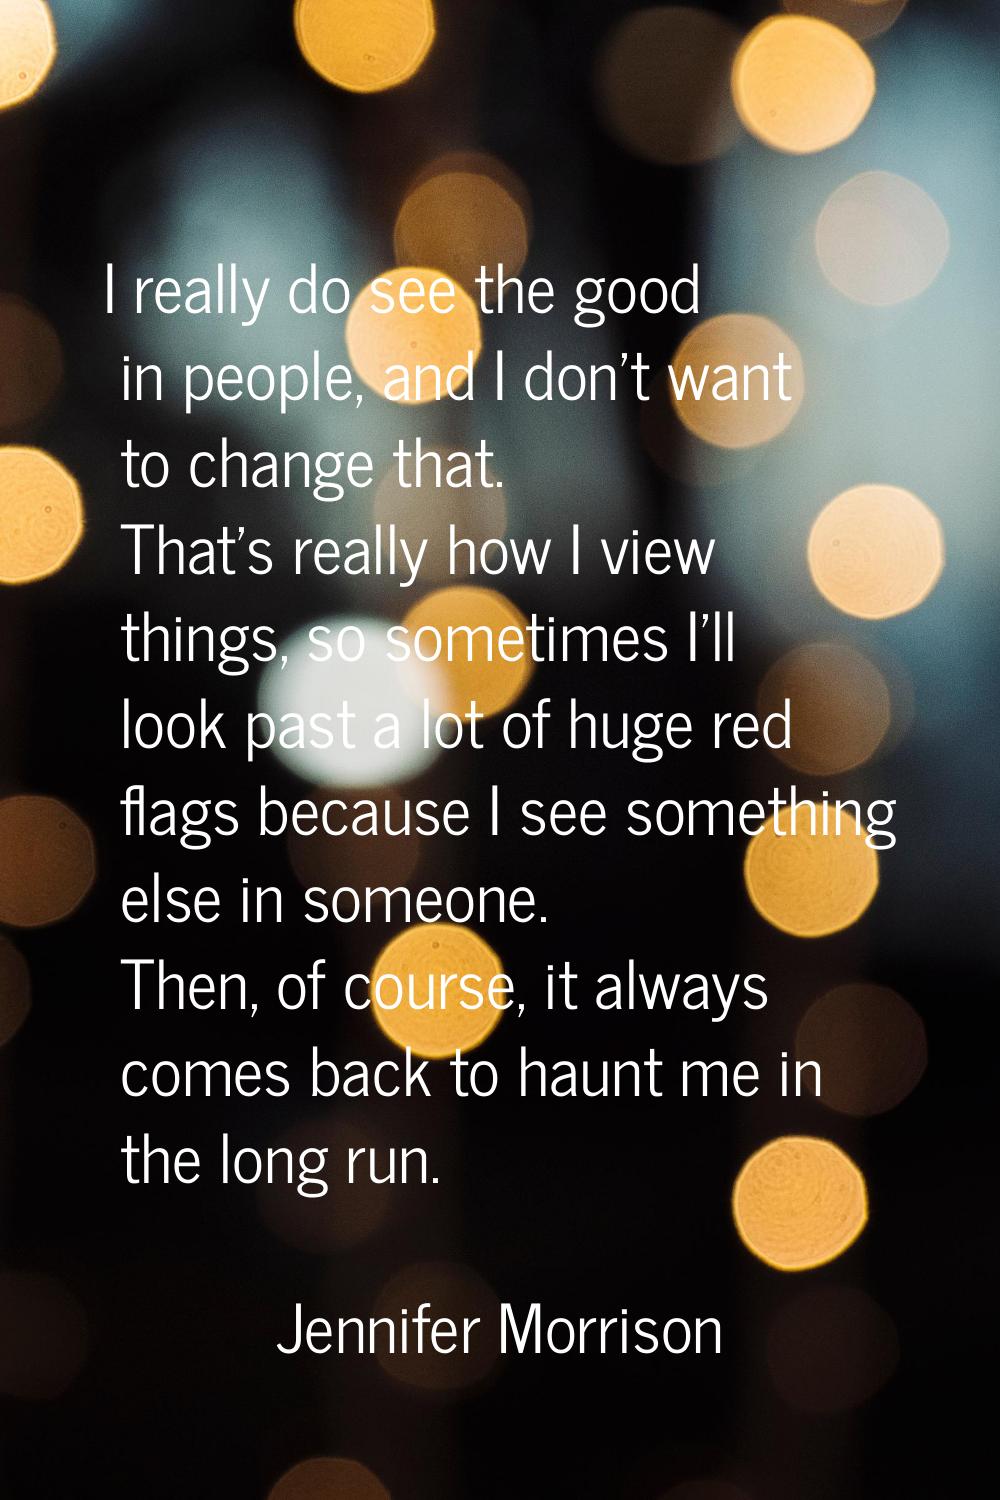 I really do see the good in people, and I don't want to change that. That's really how I view thing